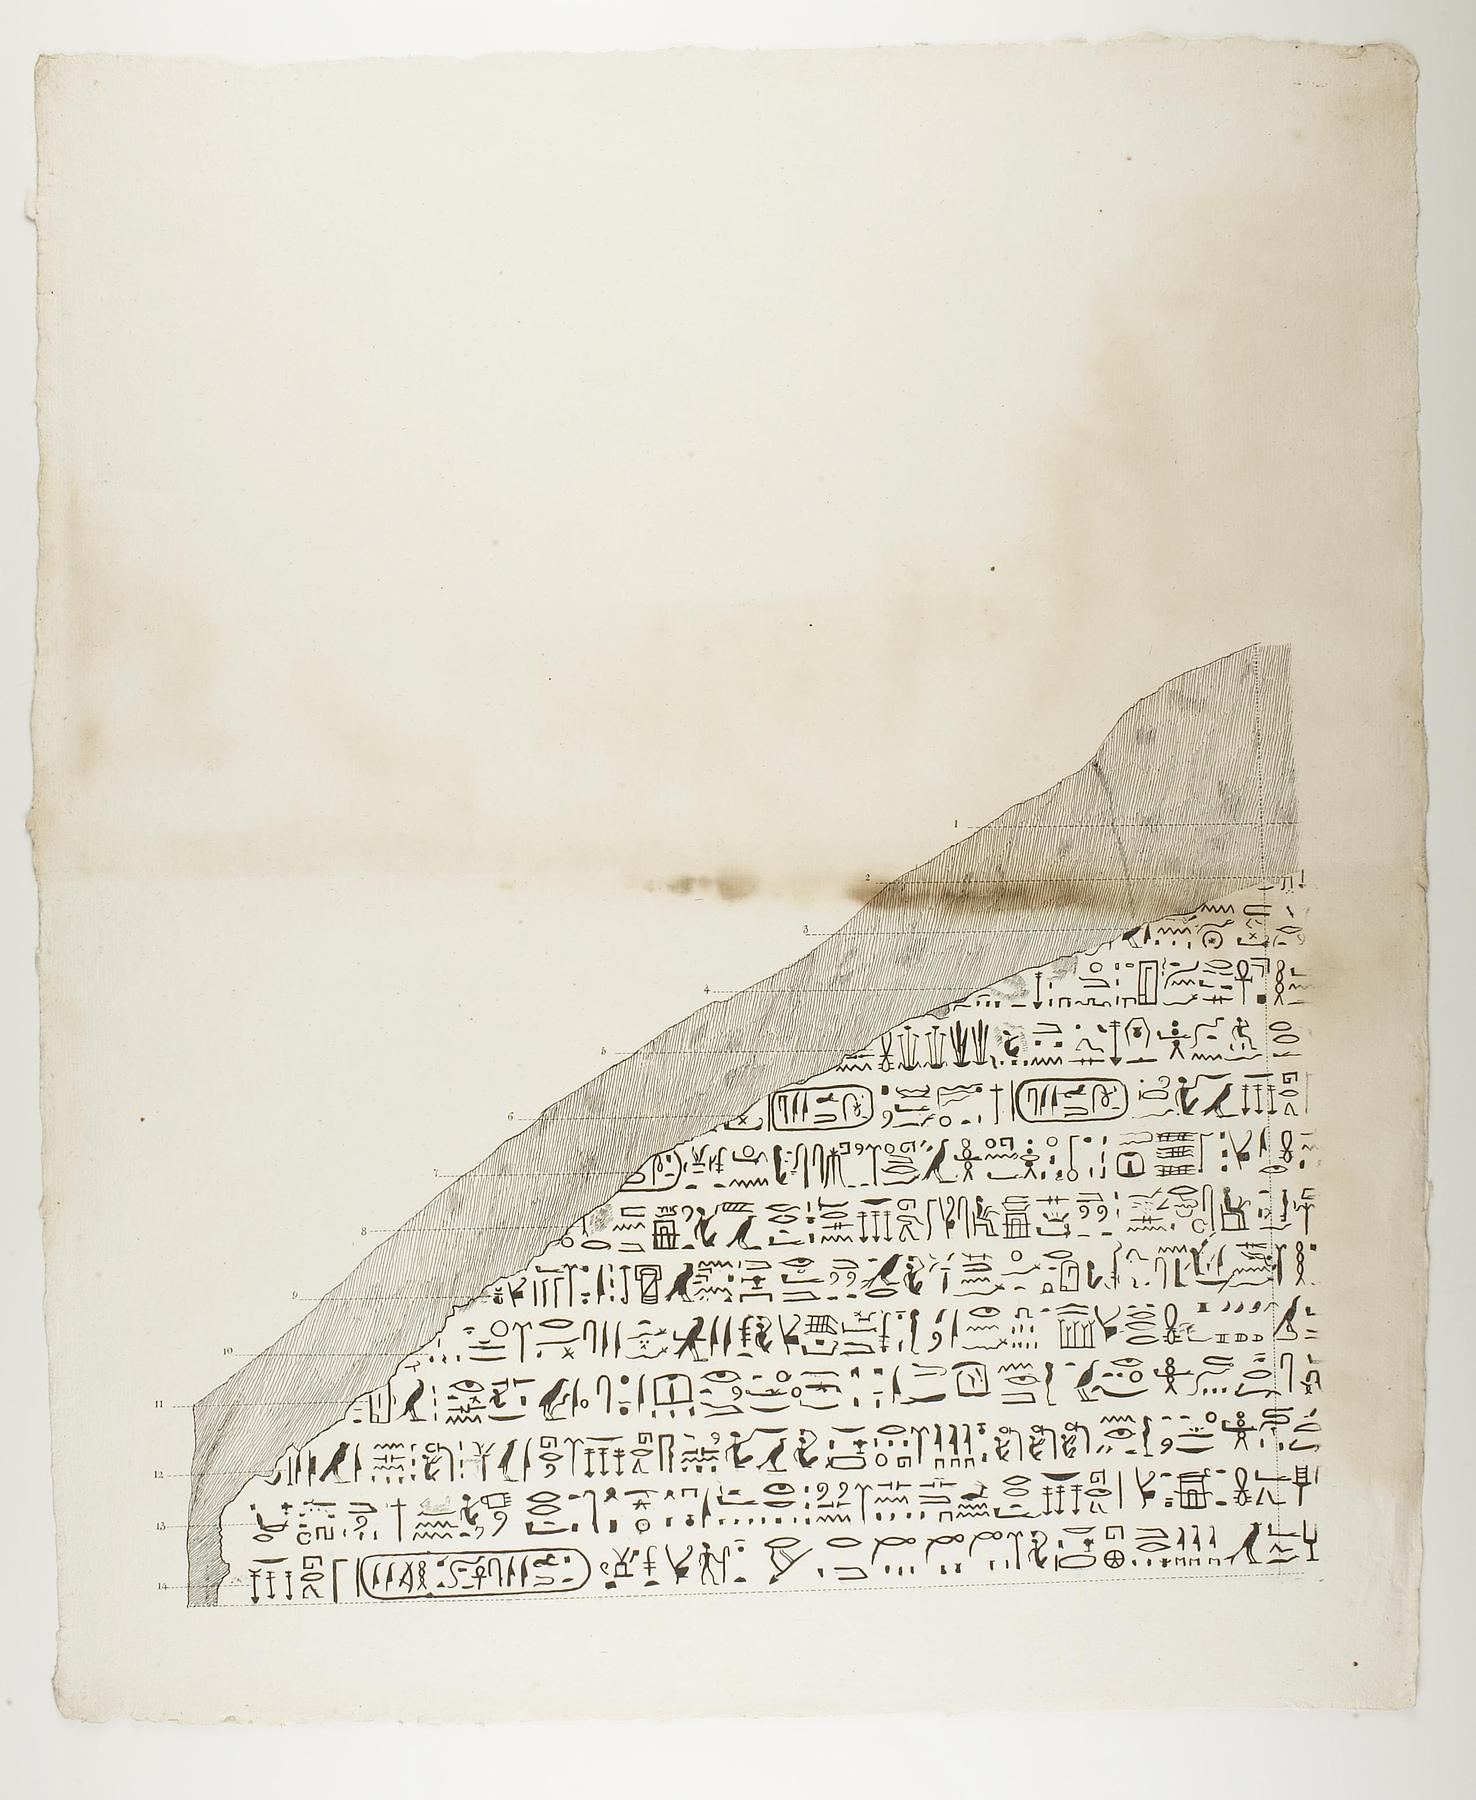 Decree, Hieroglyphic Inscription from the Rosette Stone reproduced in connction with Adolf Heinrich Friedrich Schlichtegroll's Treatise, E1340